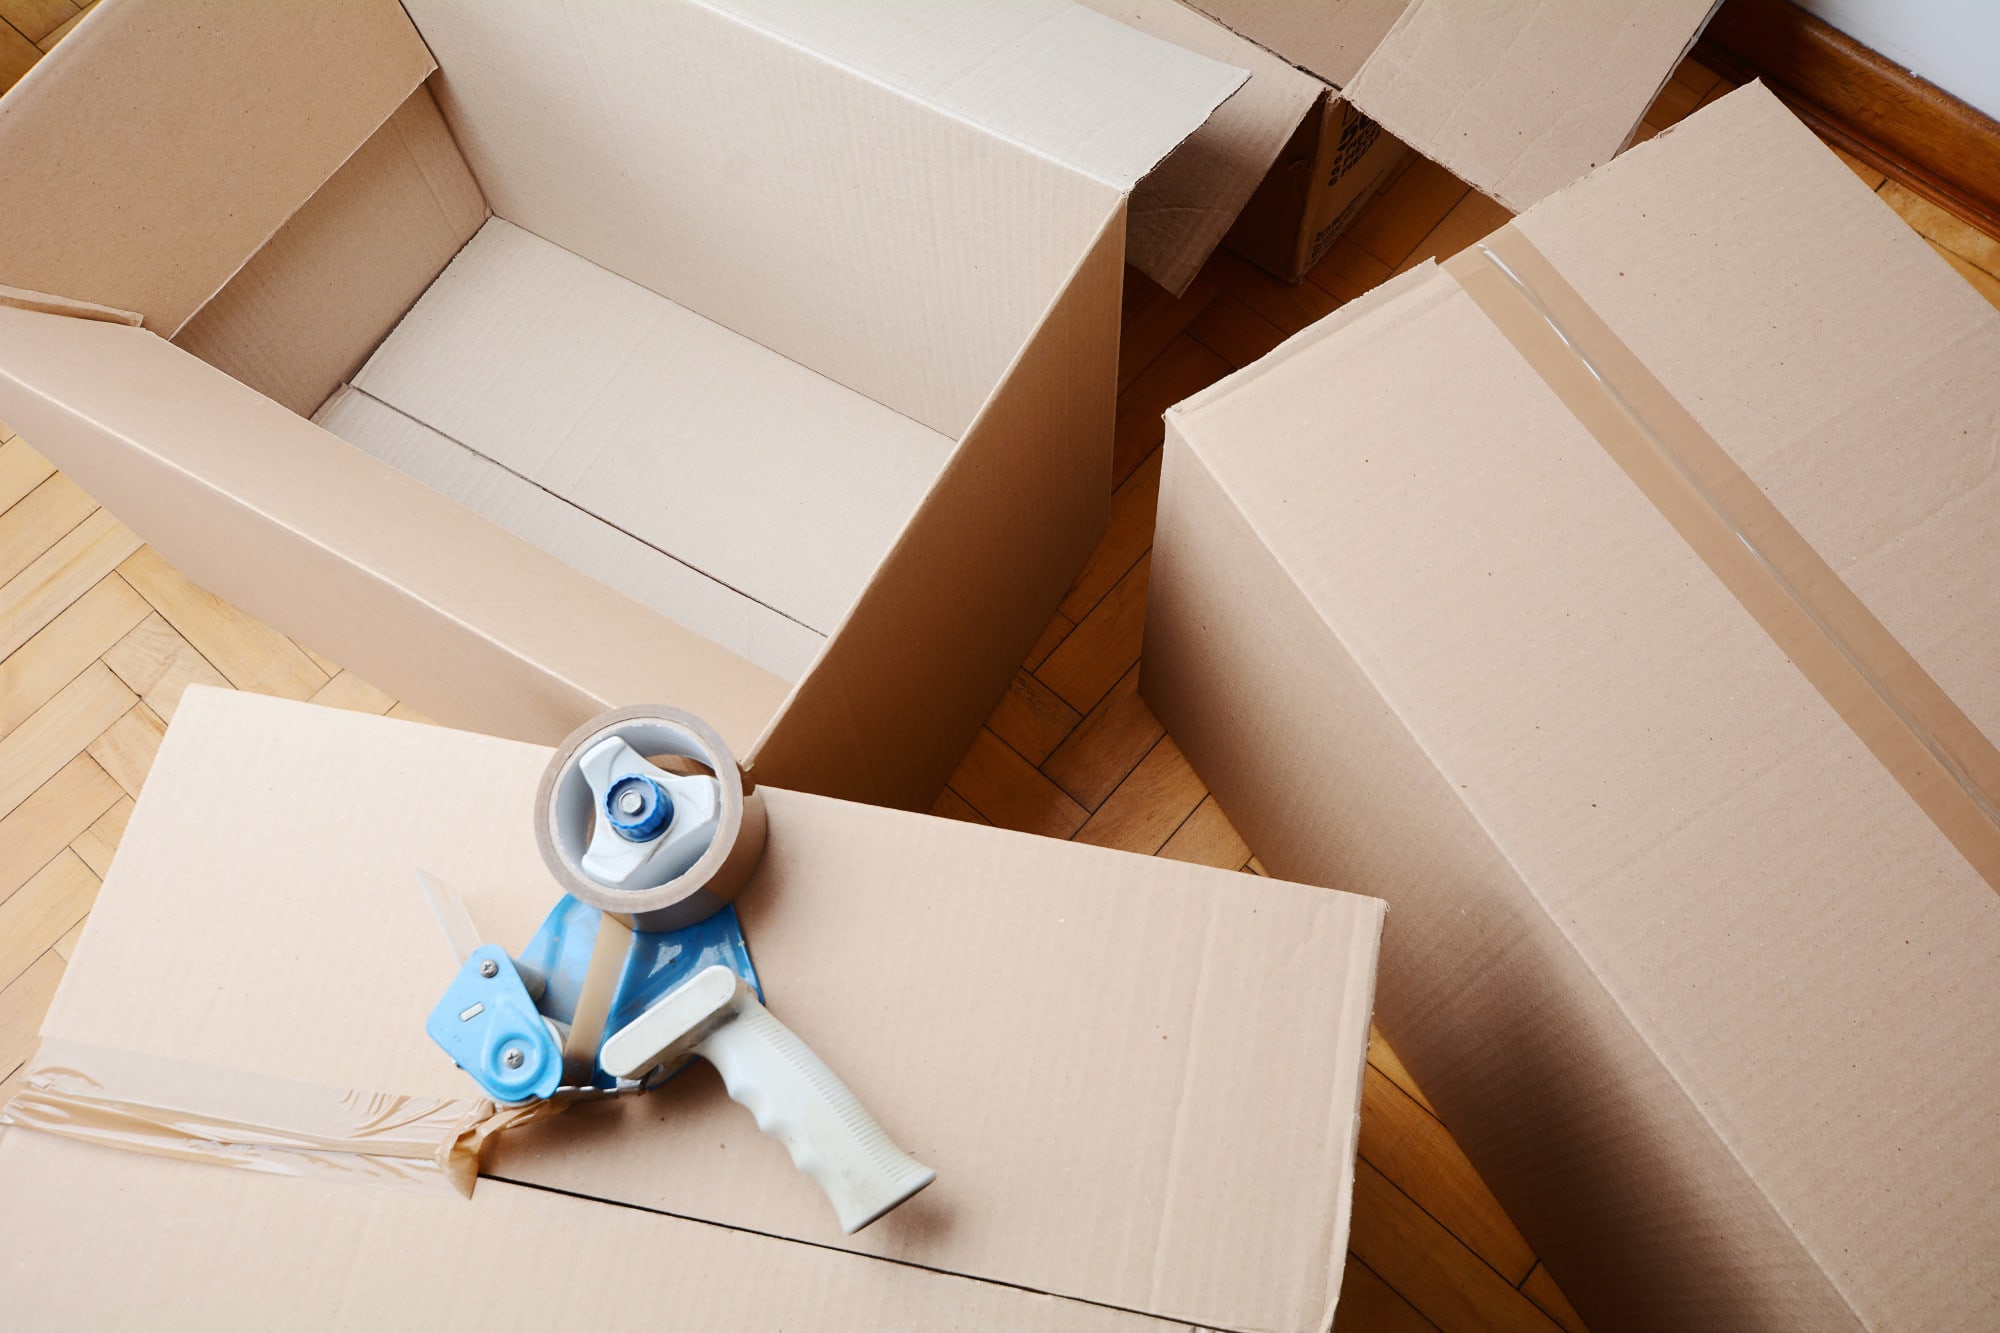 common packing mistakes